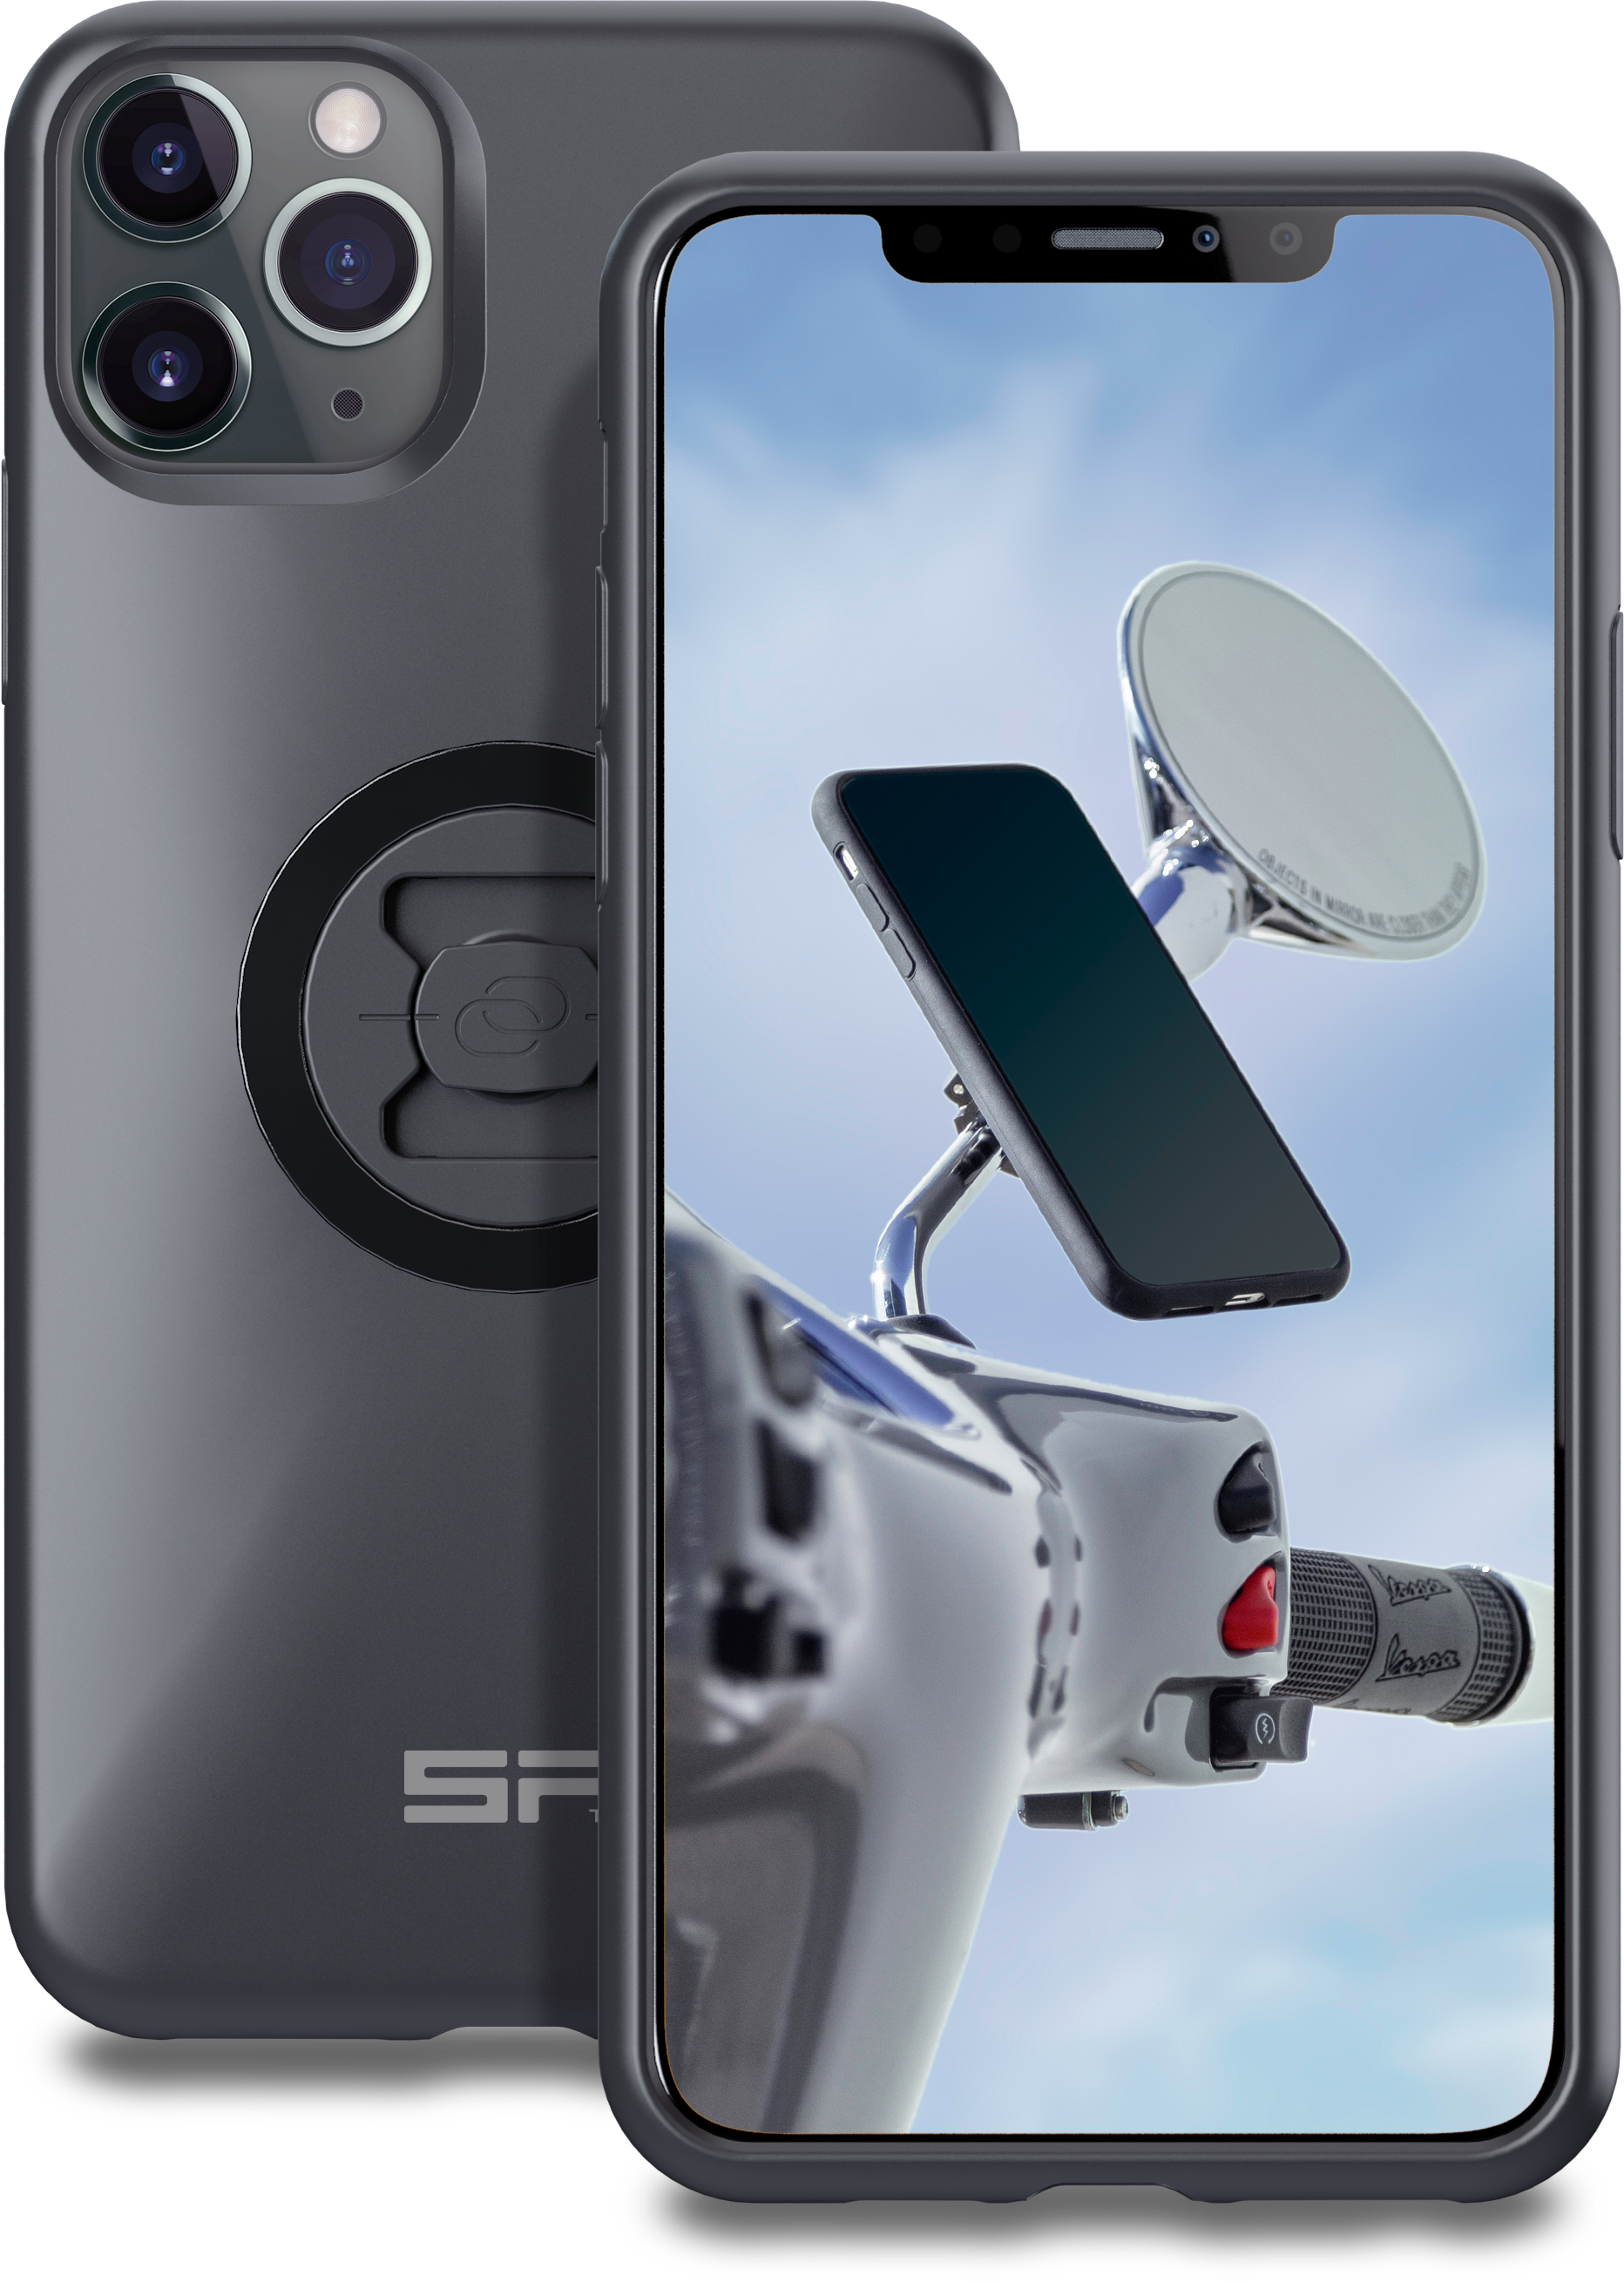 SP CONNECT Moto Mirror Bundle LT (2-in-1) iPhone 11 Pro Max/XS Max